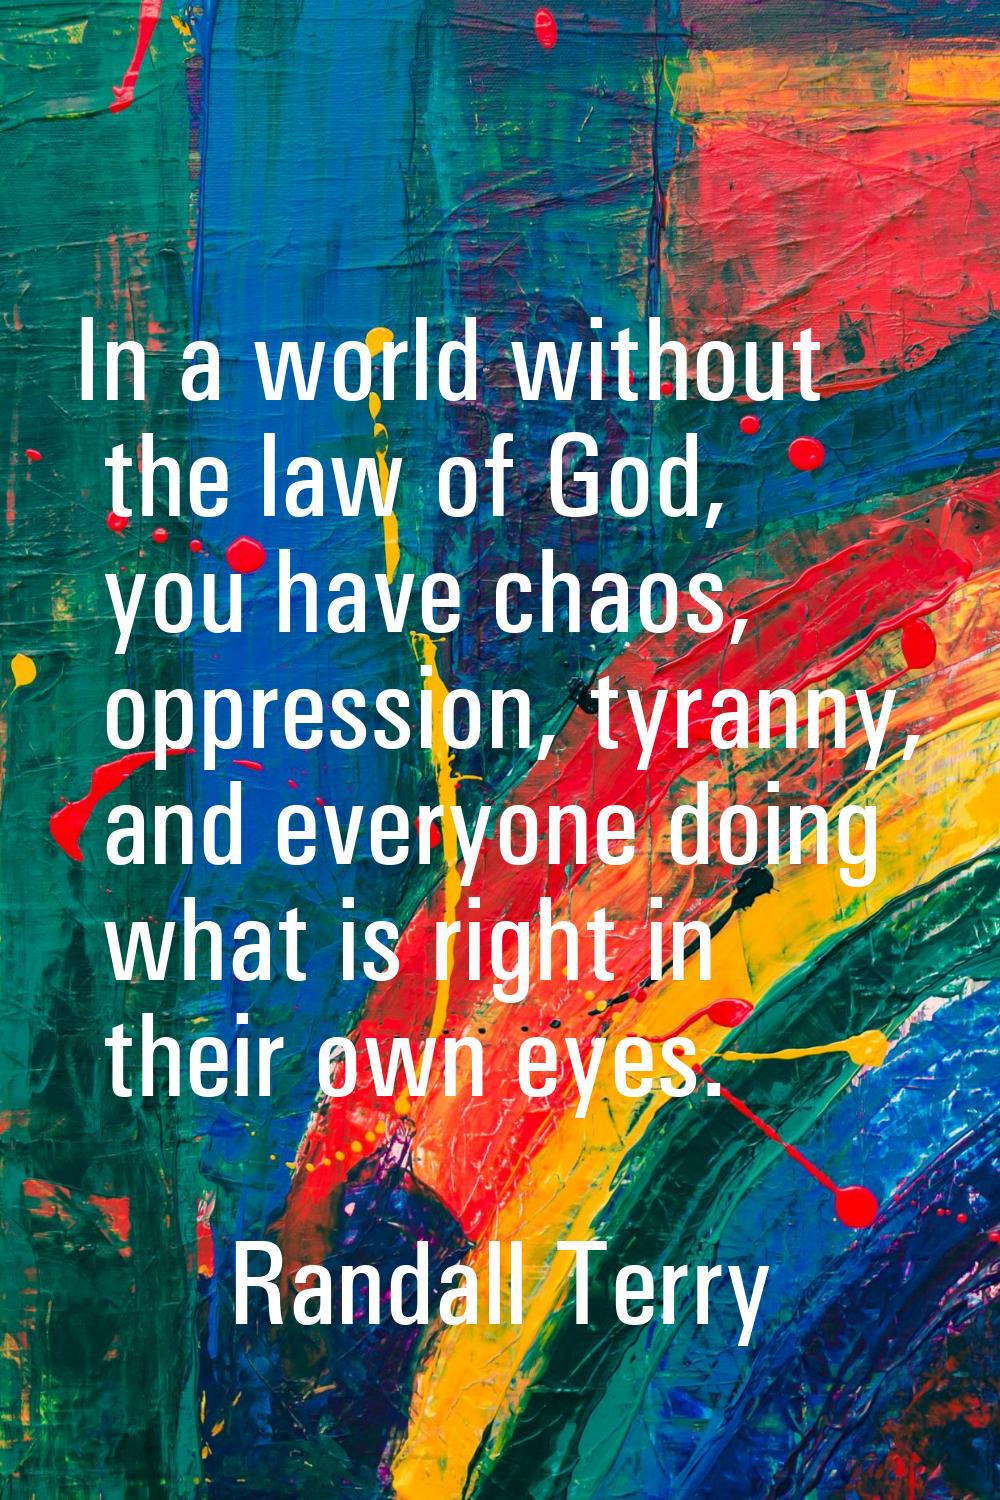 In a world without the law of God, you have chaos, oppression, tyranny, and everyone doing what is 